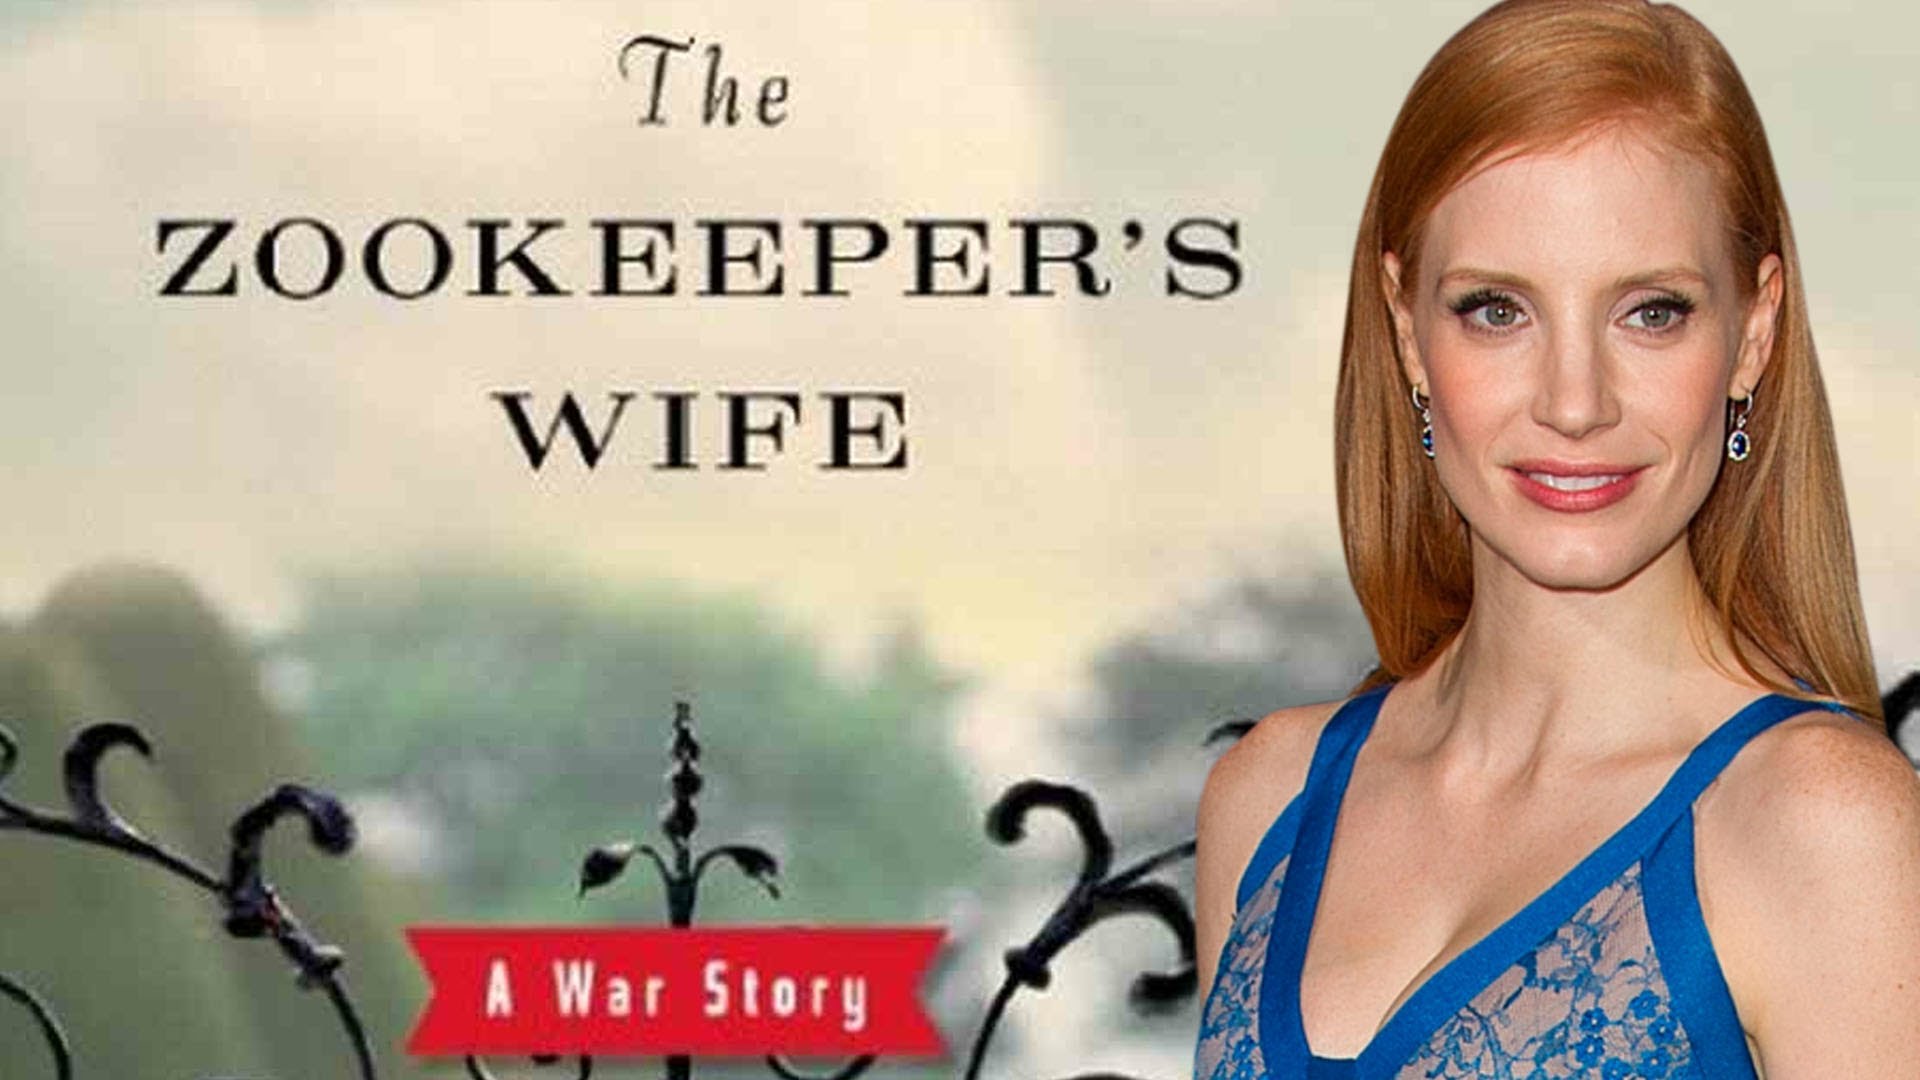 The Zookeeper's Wife #9